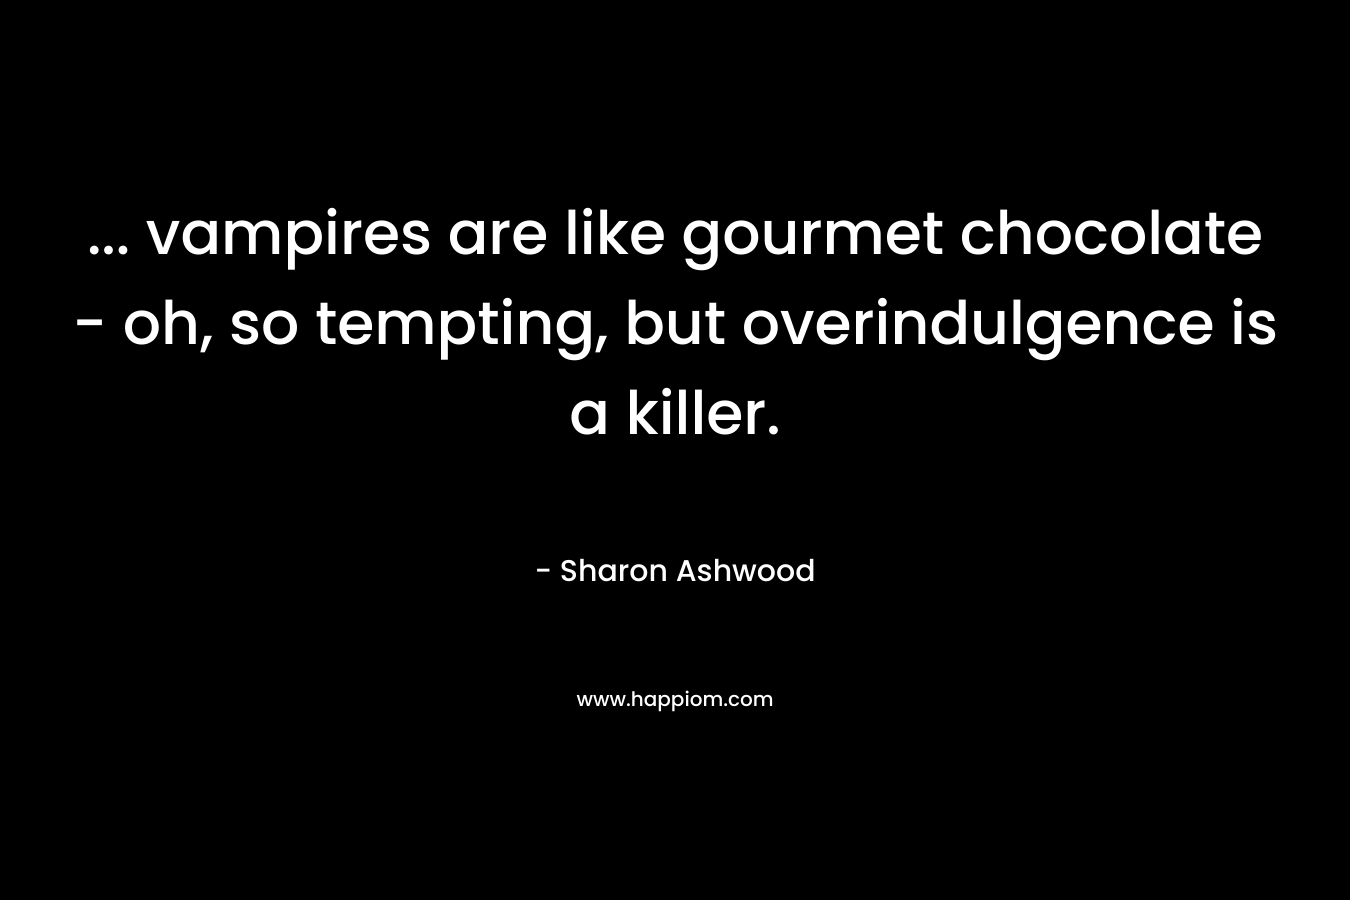 ... vampires are like gourmet chocolate - oh, so tempting, but overindulgence is a killer.